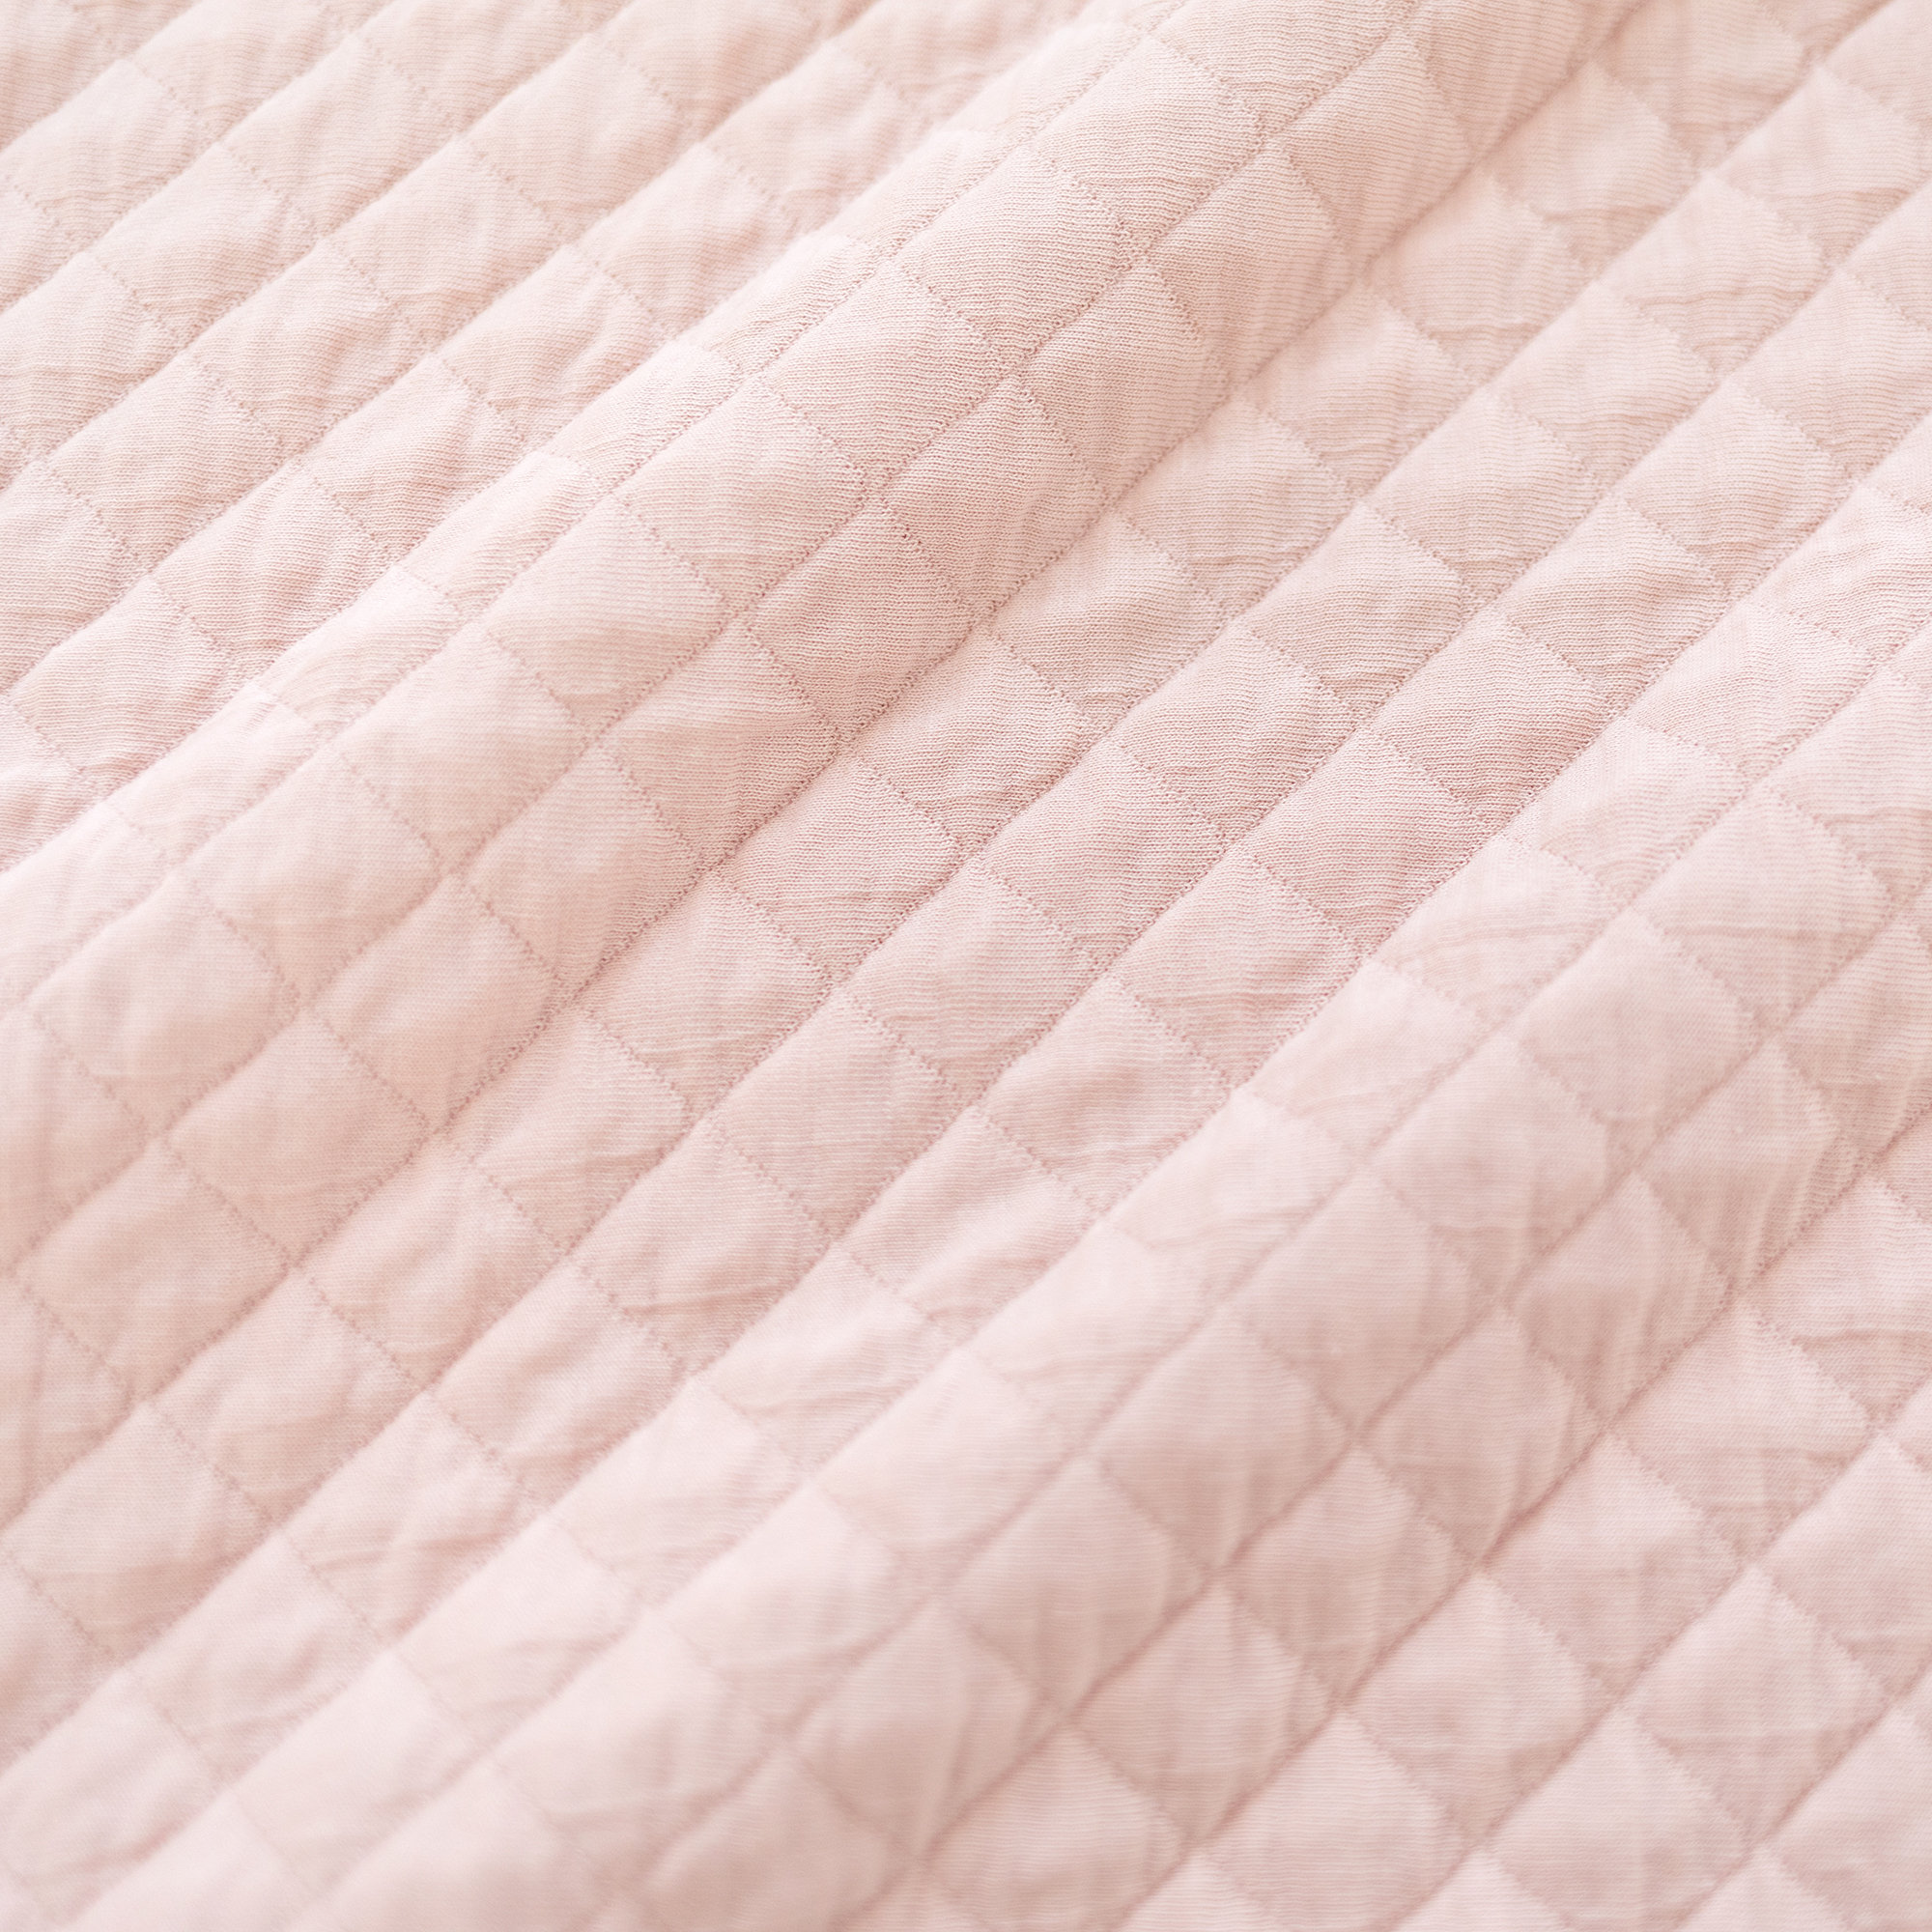 Bavoir waterproof Pady quilted jersey 37cm QUILT Blush[CARE]